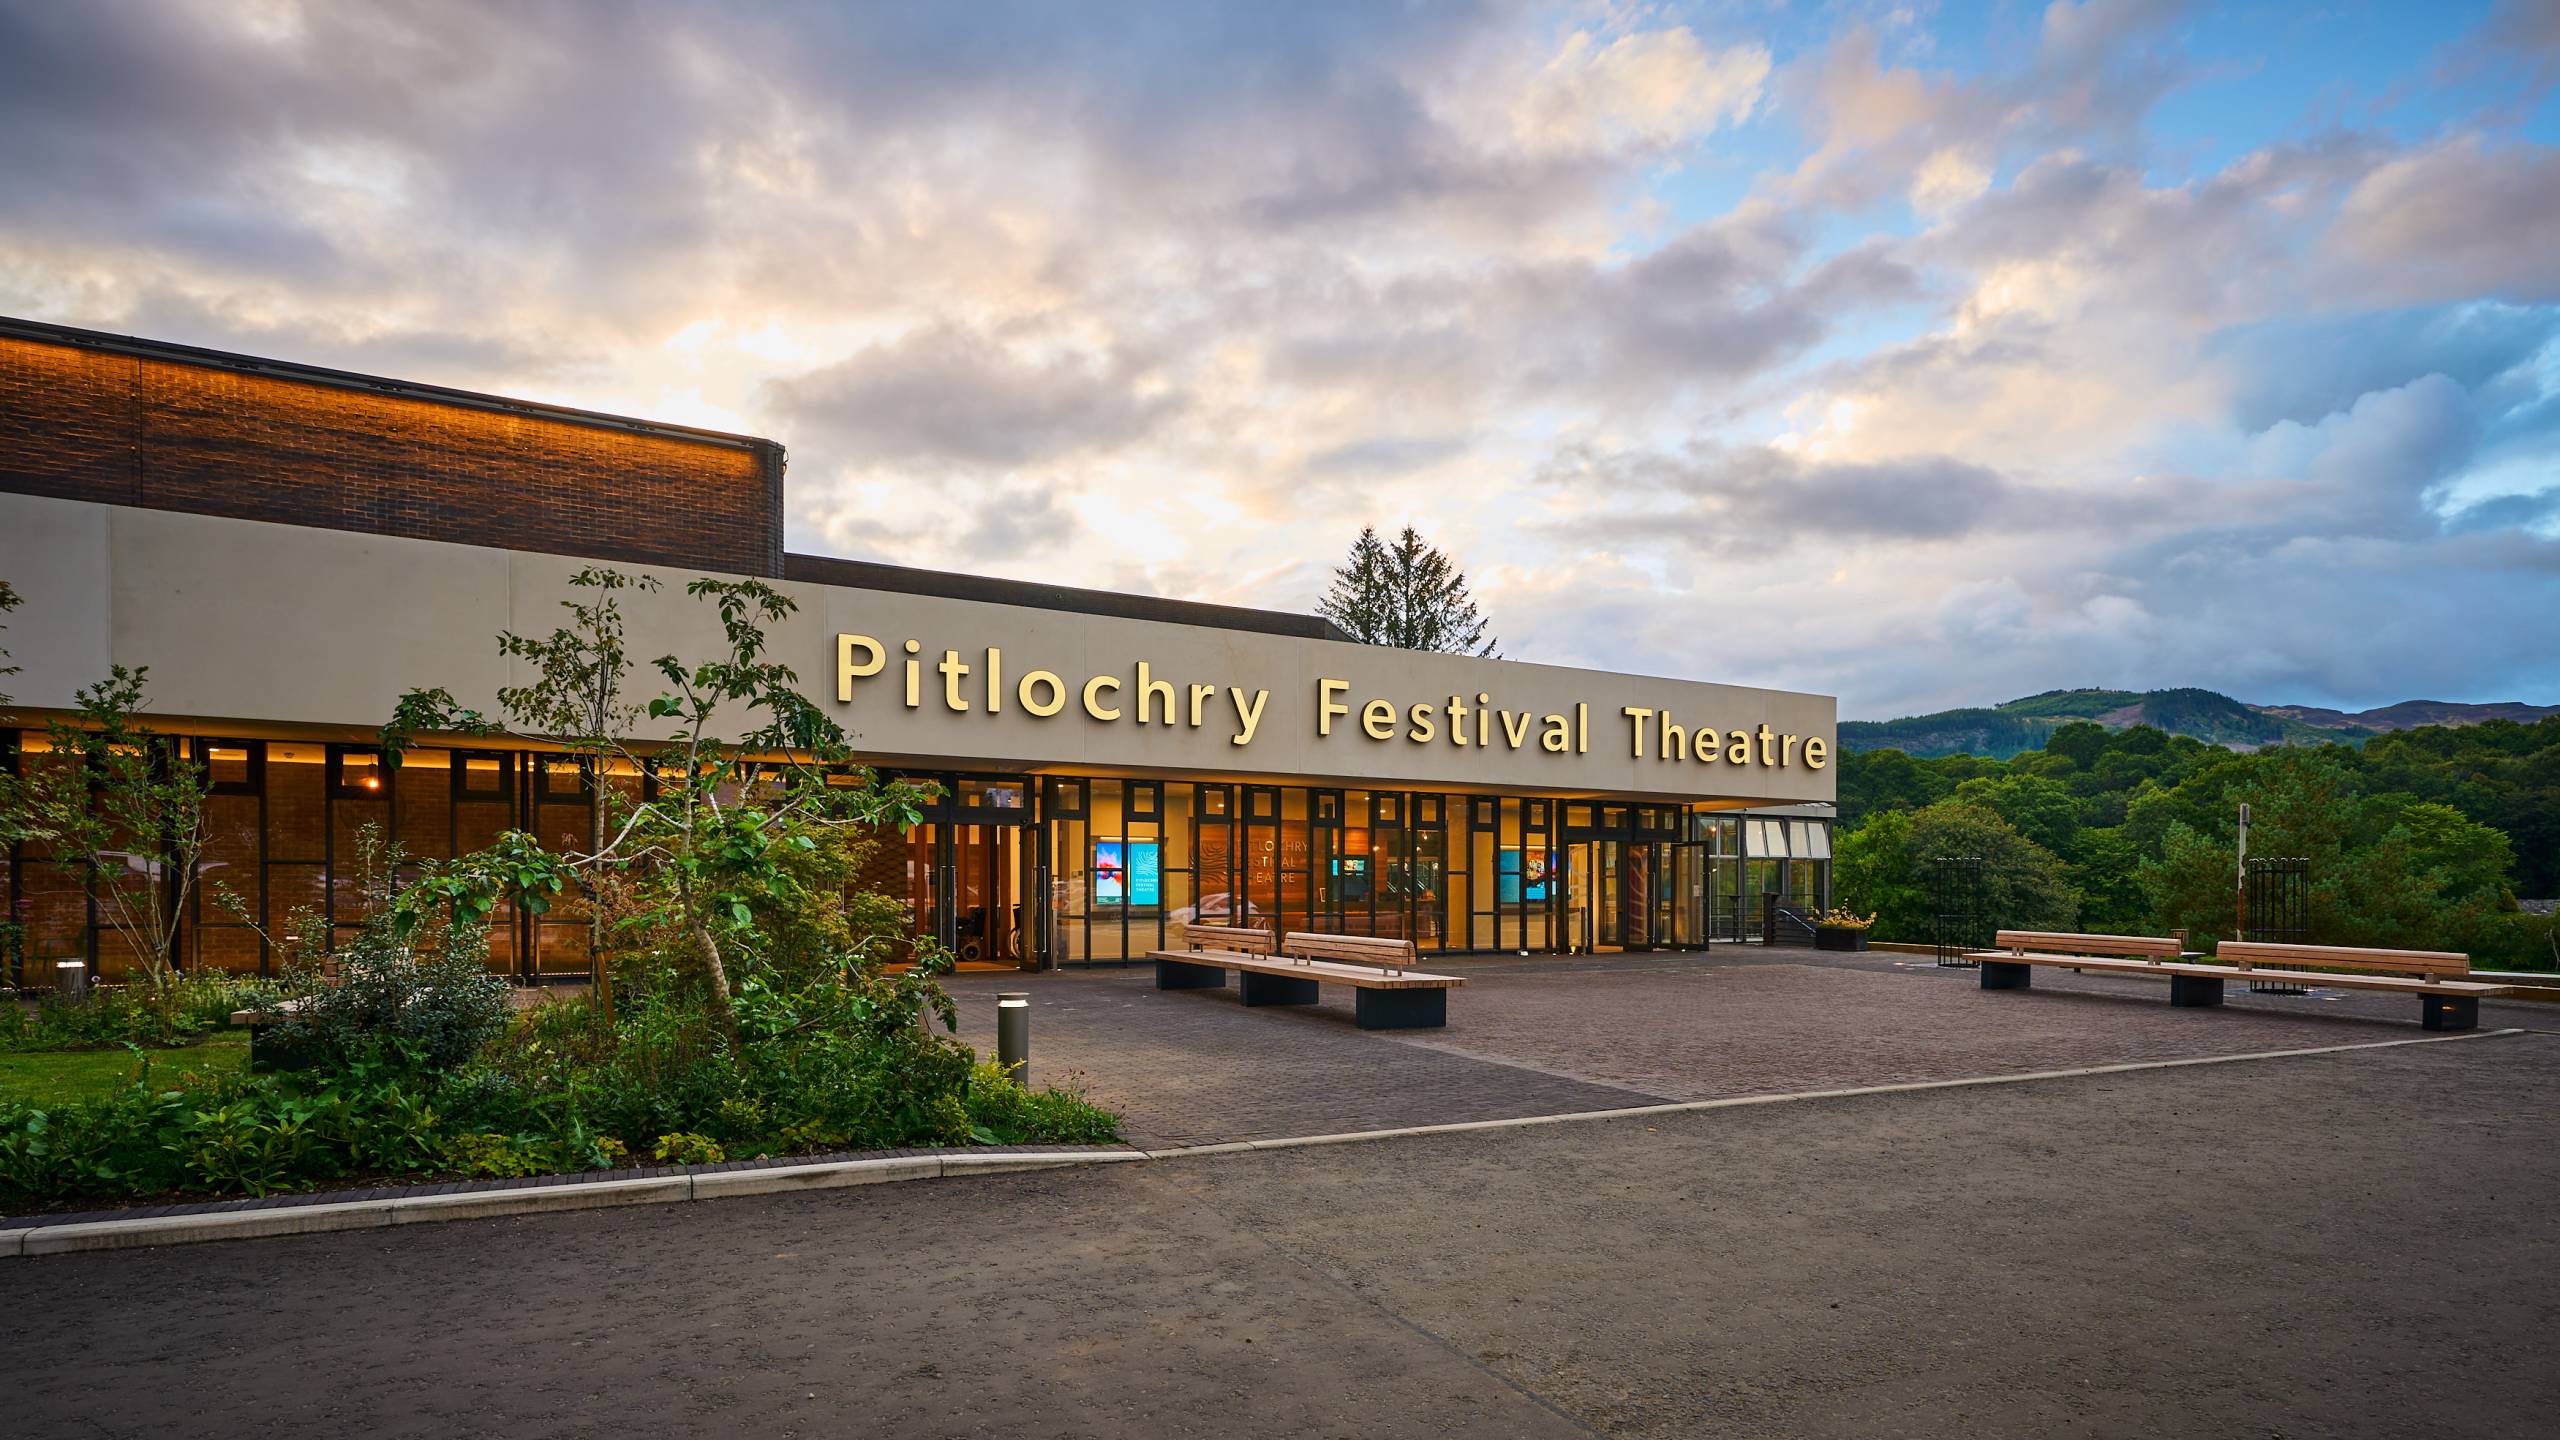 An image with a sign on the theatre's front entrance that says Pitlochry Festival Theatre with the sky and trees behind it